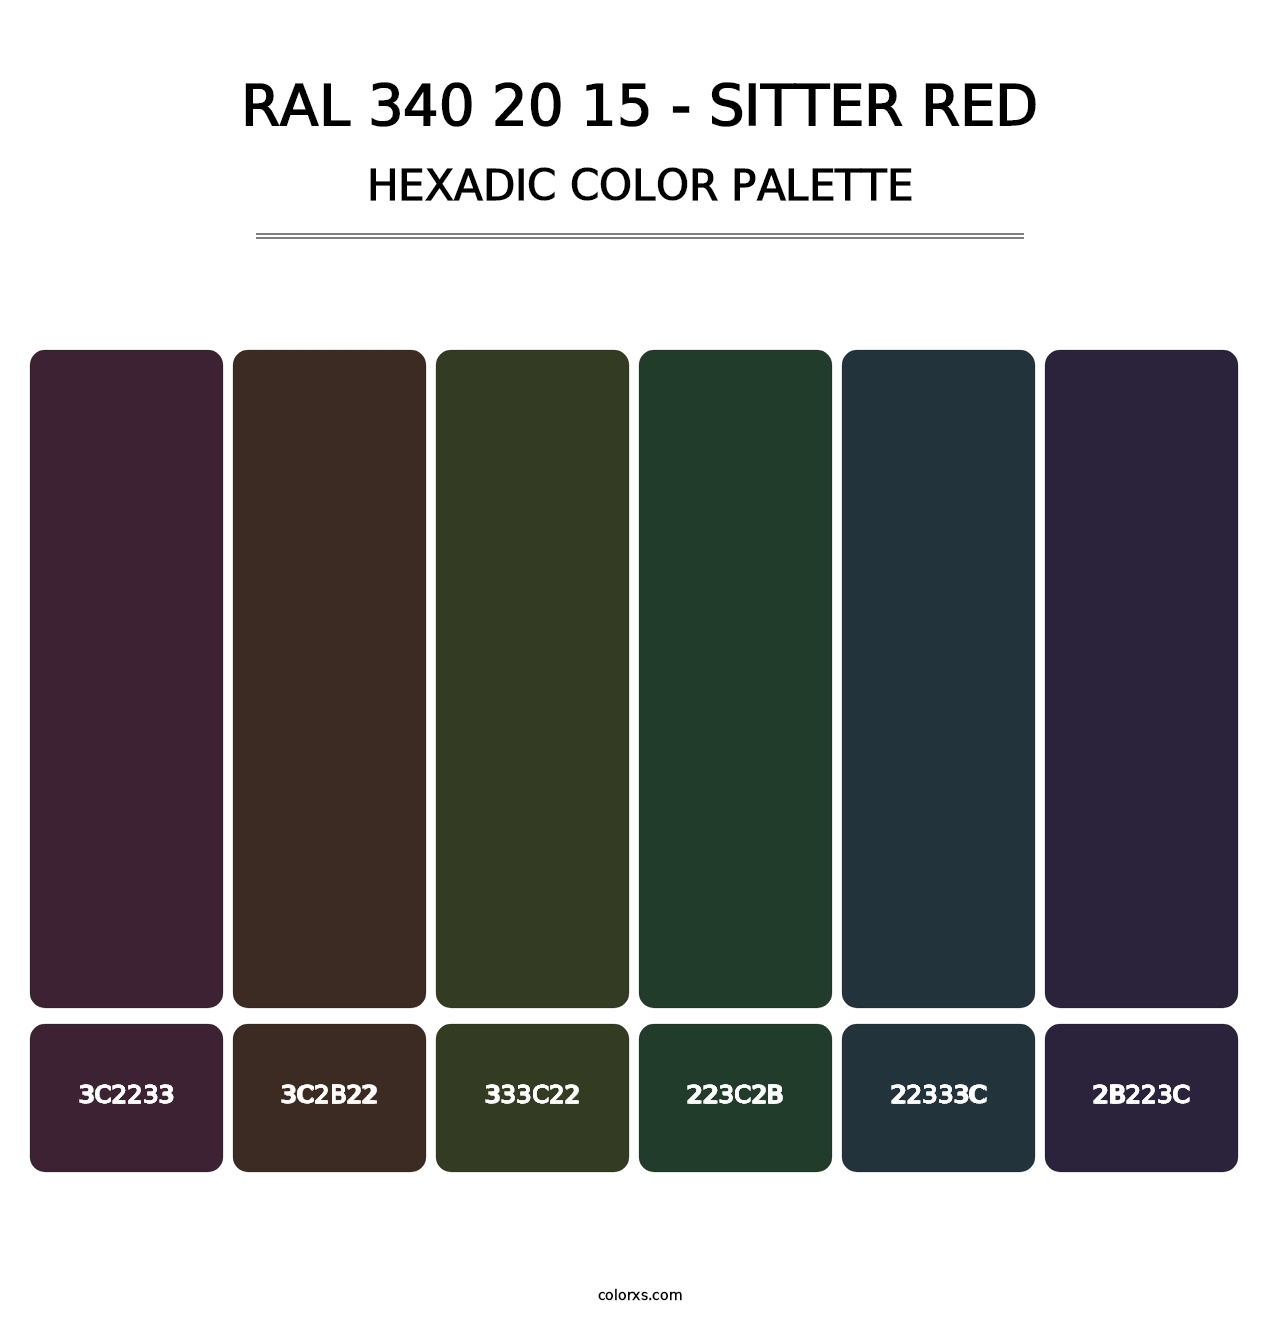 RAL 340 20 15 - Sitter Red - Hexadic Color Palette